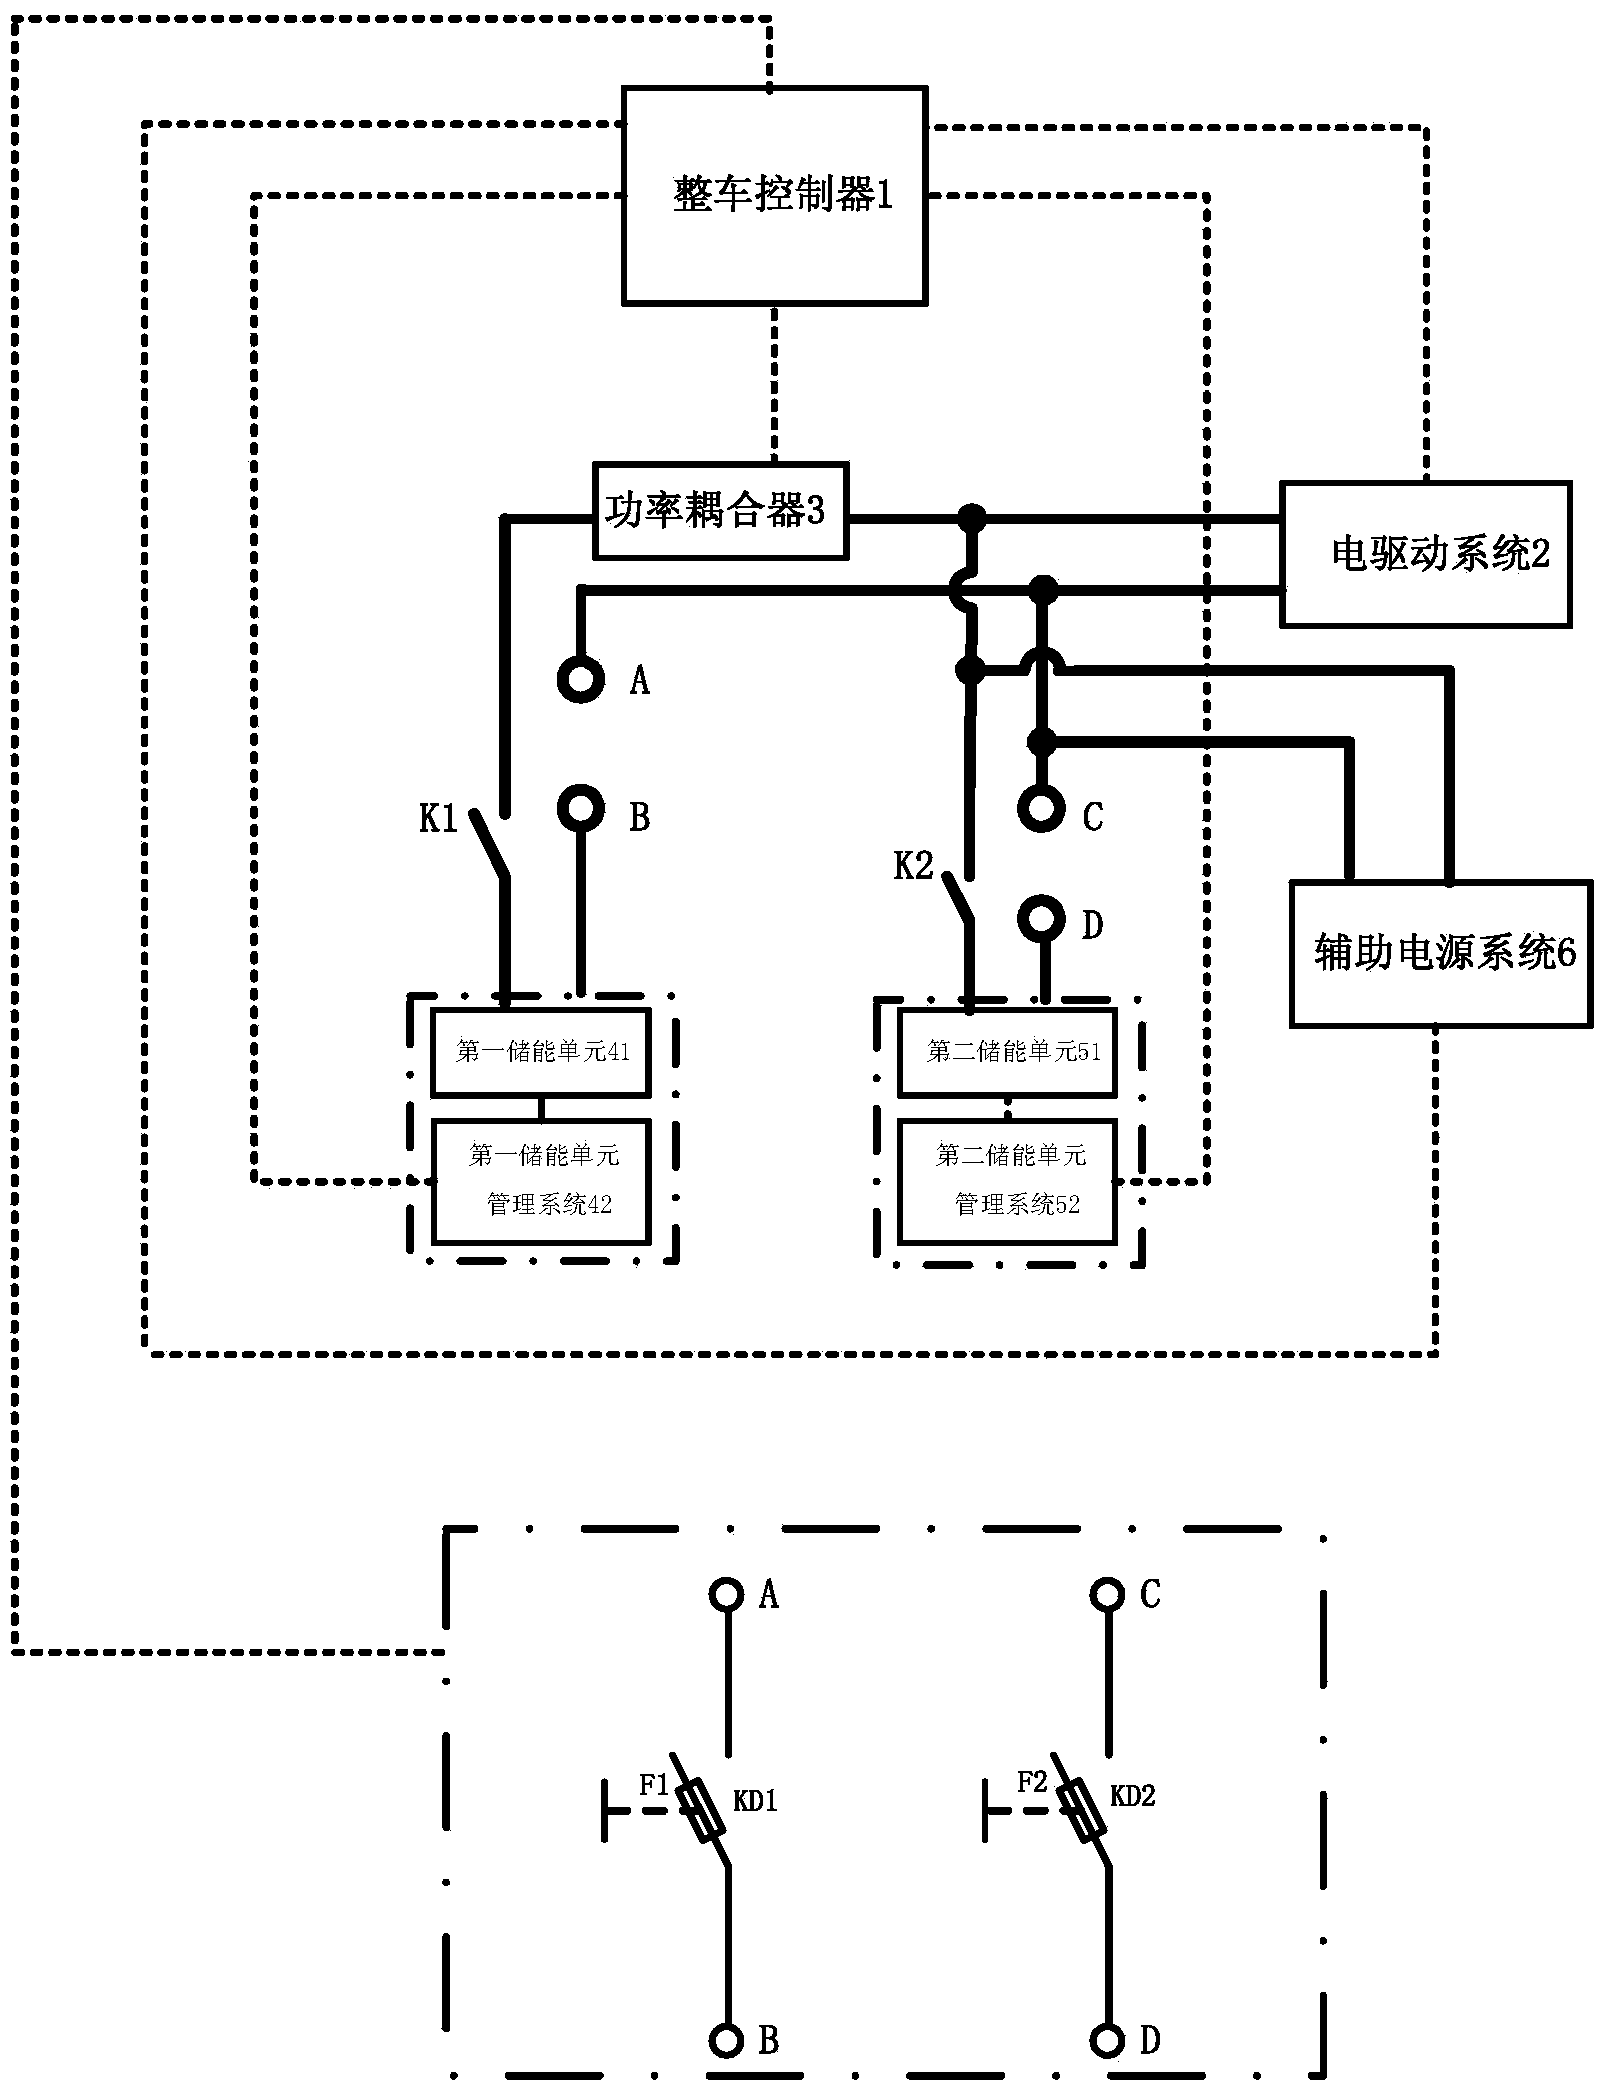 High-voltage safety control system and method of electric vehicle power system